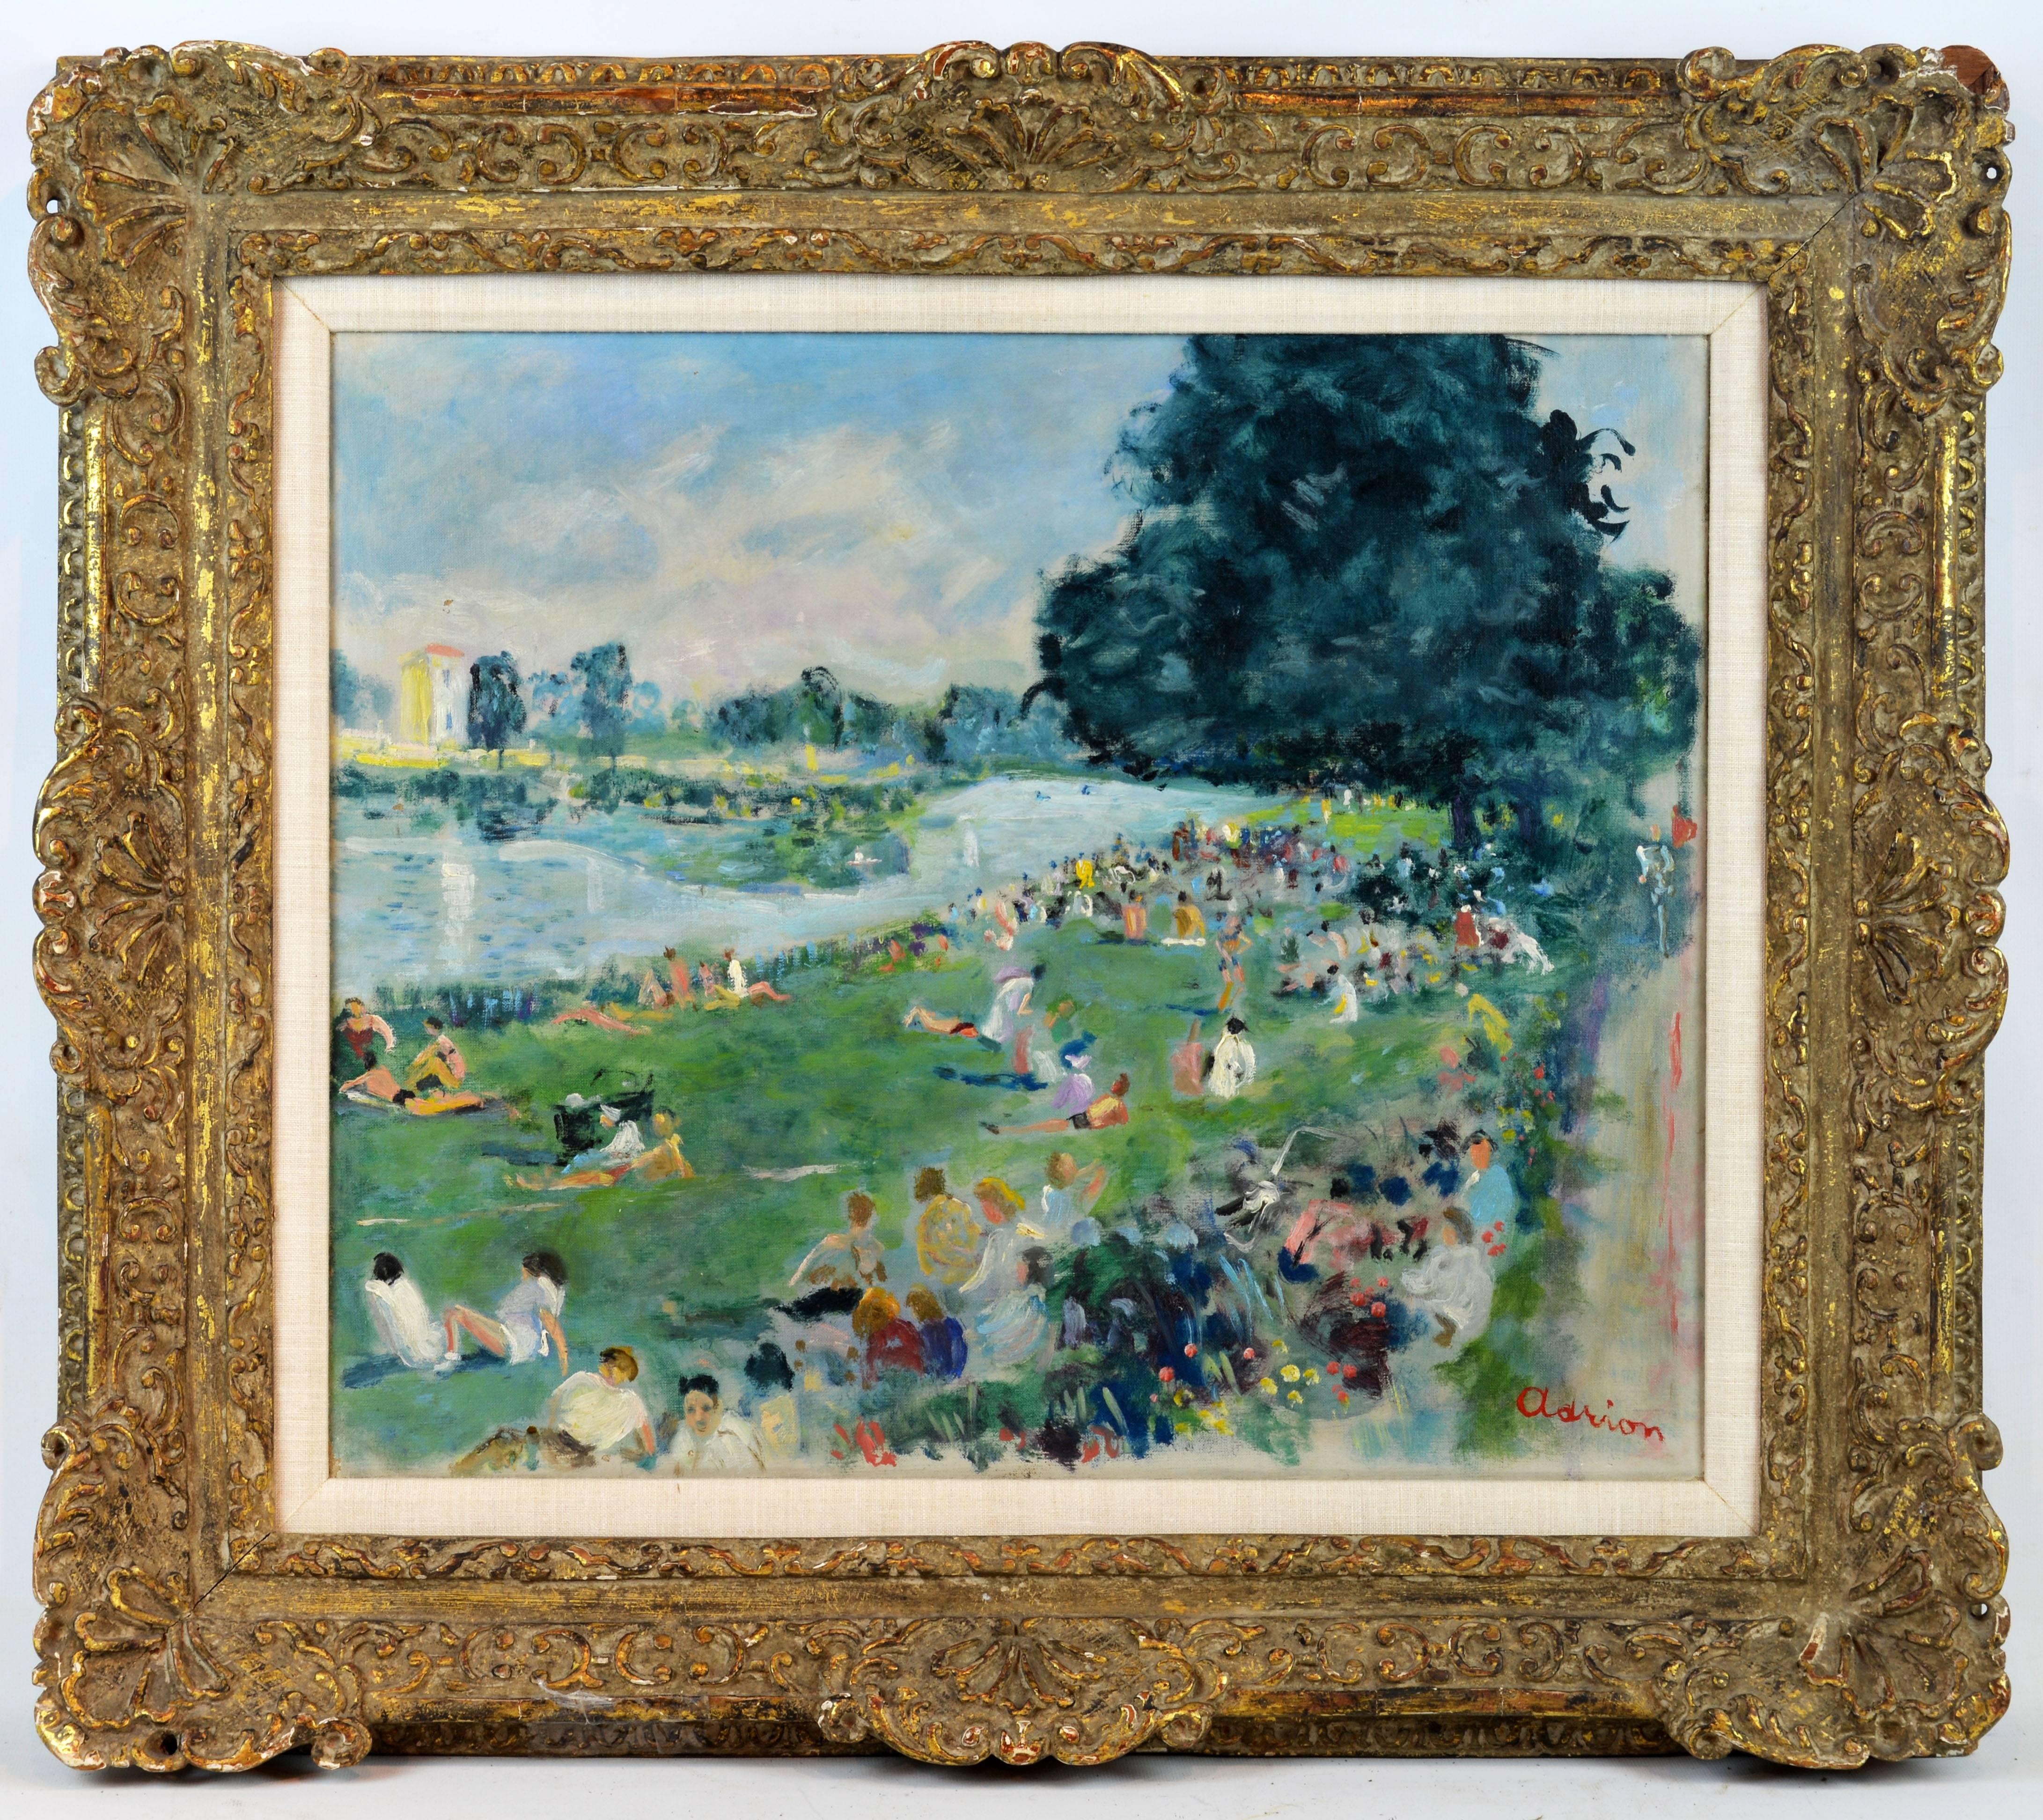 'Summer in the Park'
by Lucien Adrion, French (1889-1953)
18 x 22 in. without frame, 26 x 30 including frame
Oil on canvas, signed
Housed in a barbizon style gallery frame.

Lucien Adrion:
With international auction records up to $104,500 (29